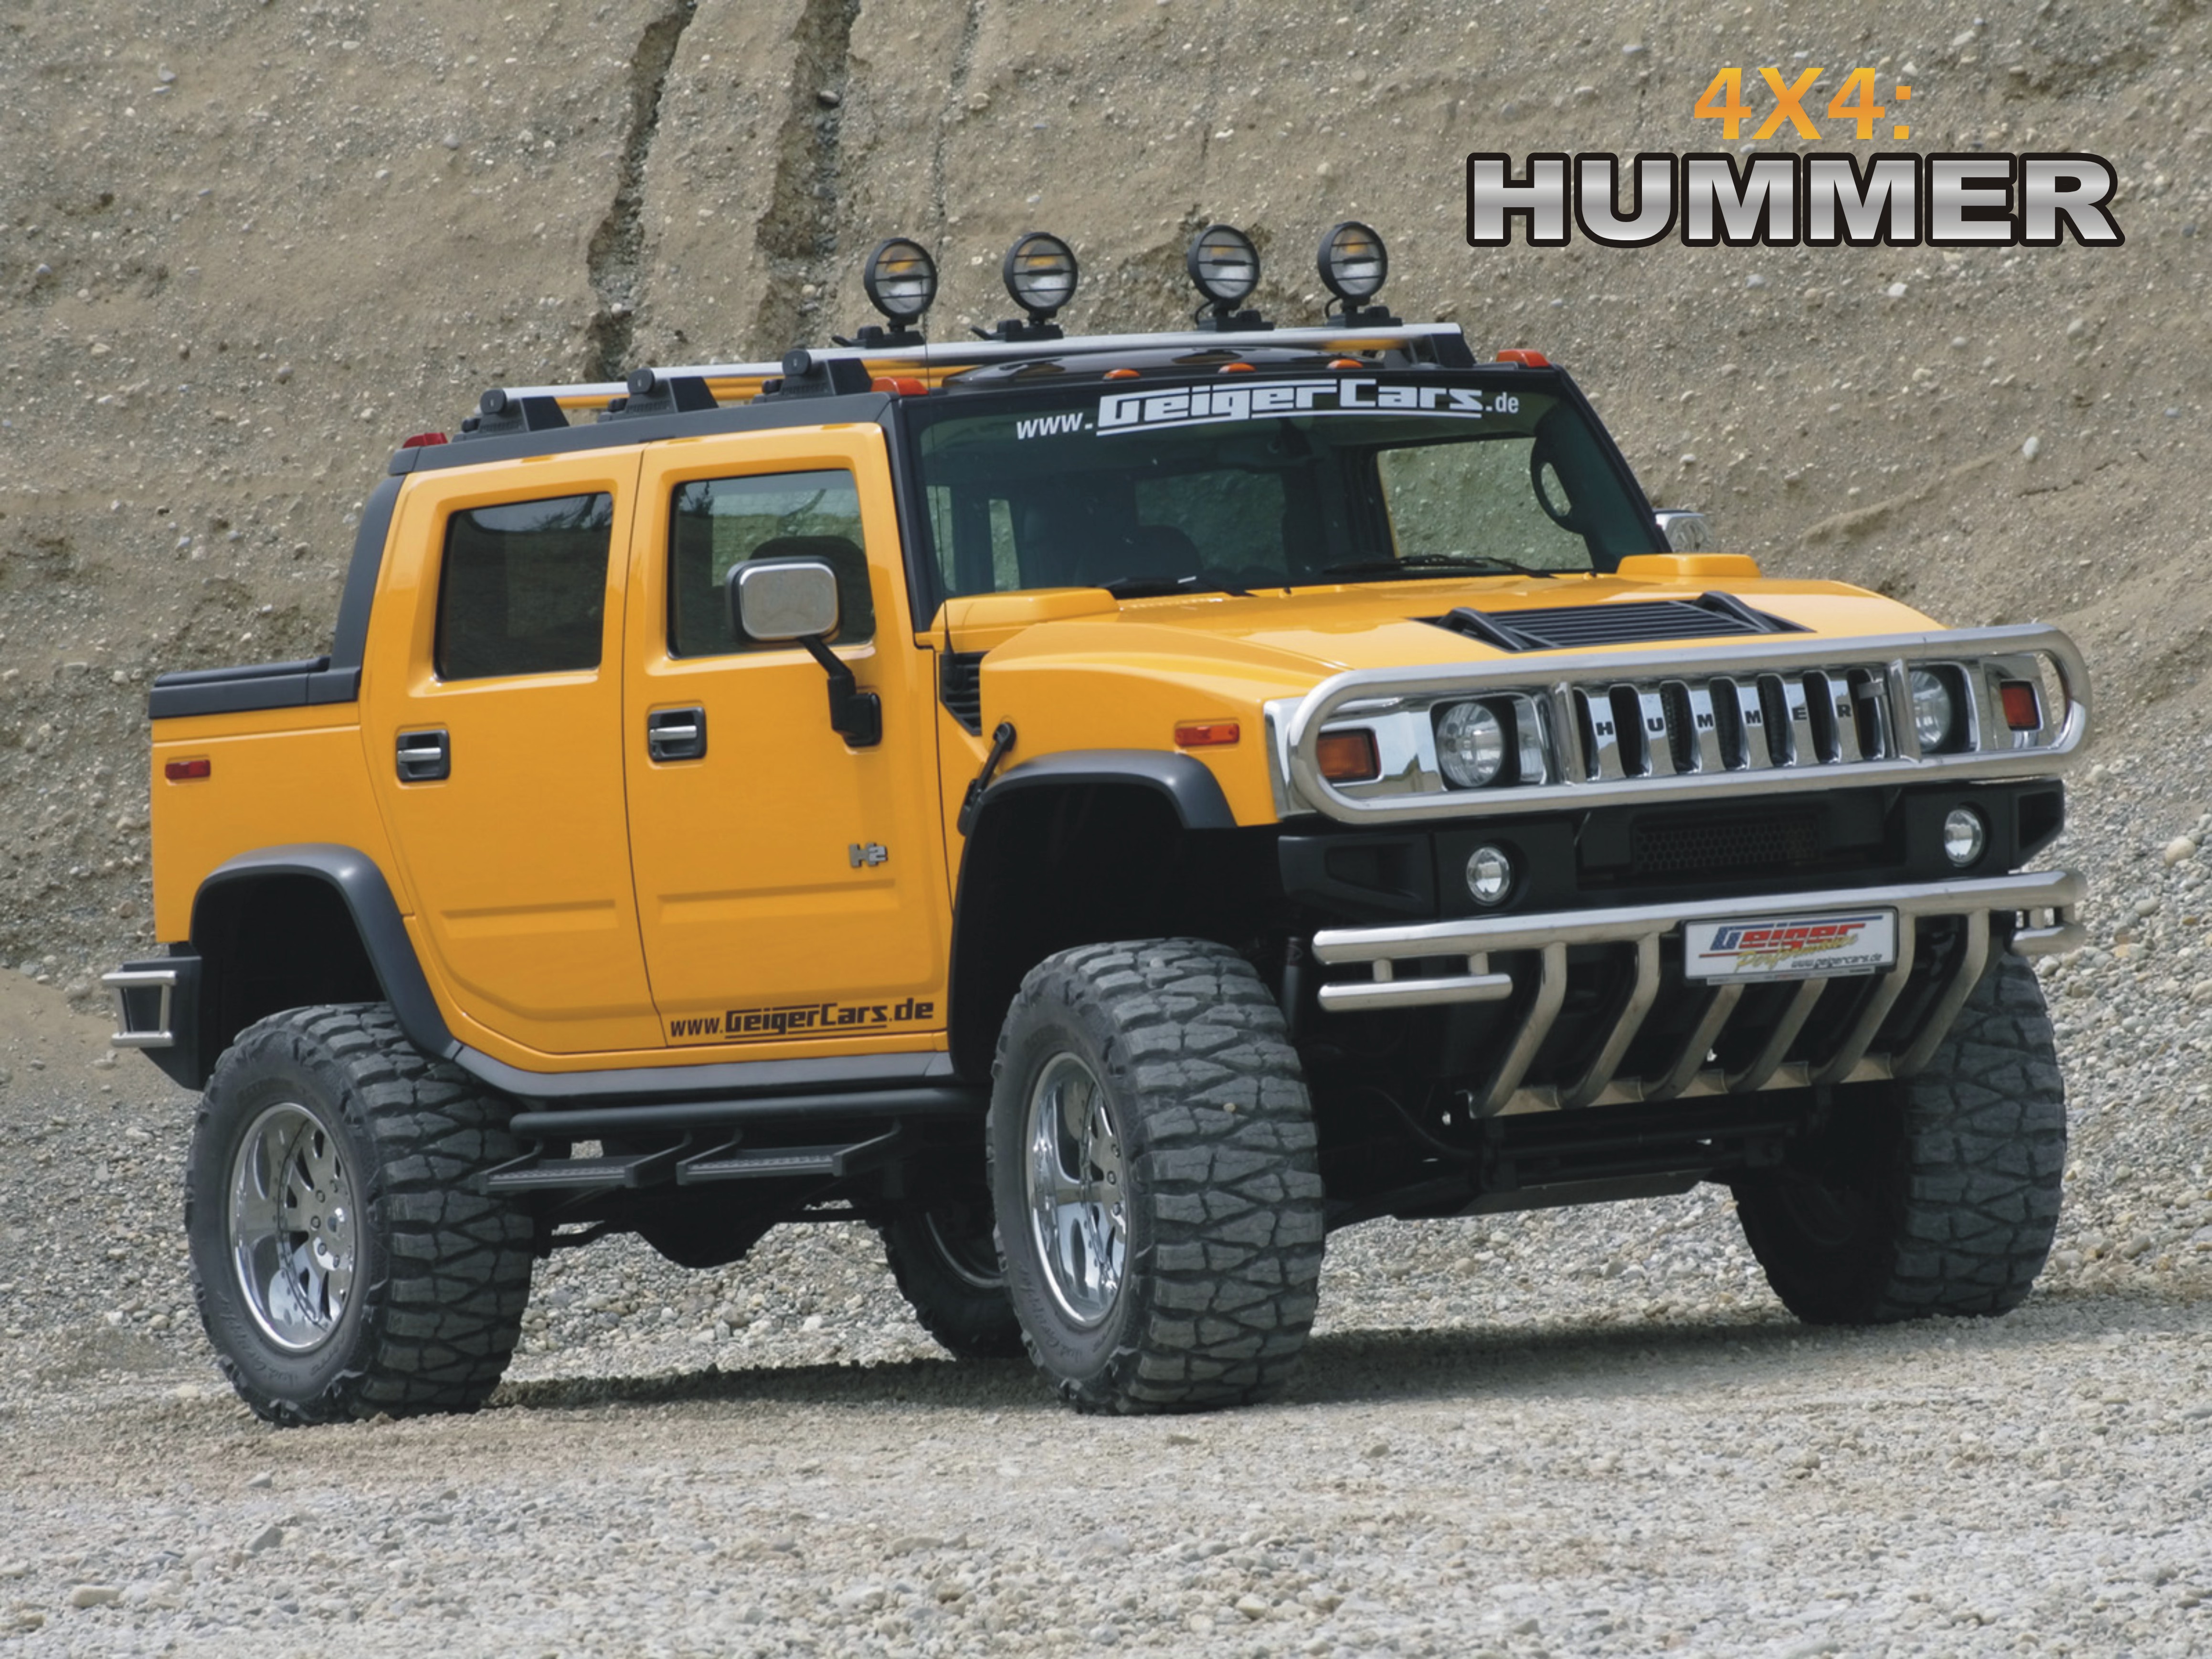 4×4 Hummer Game Free Download For PC 2015 | christoferbell